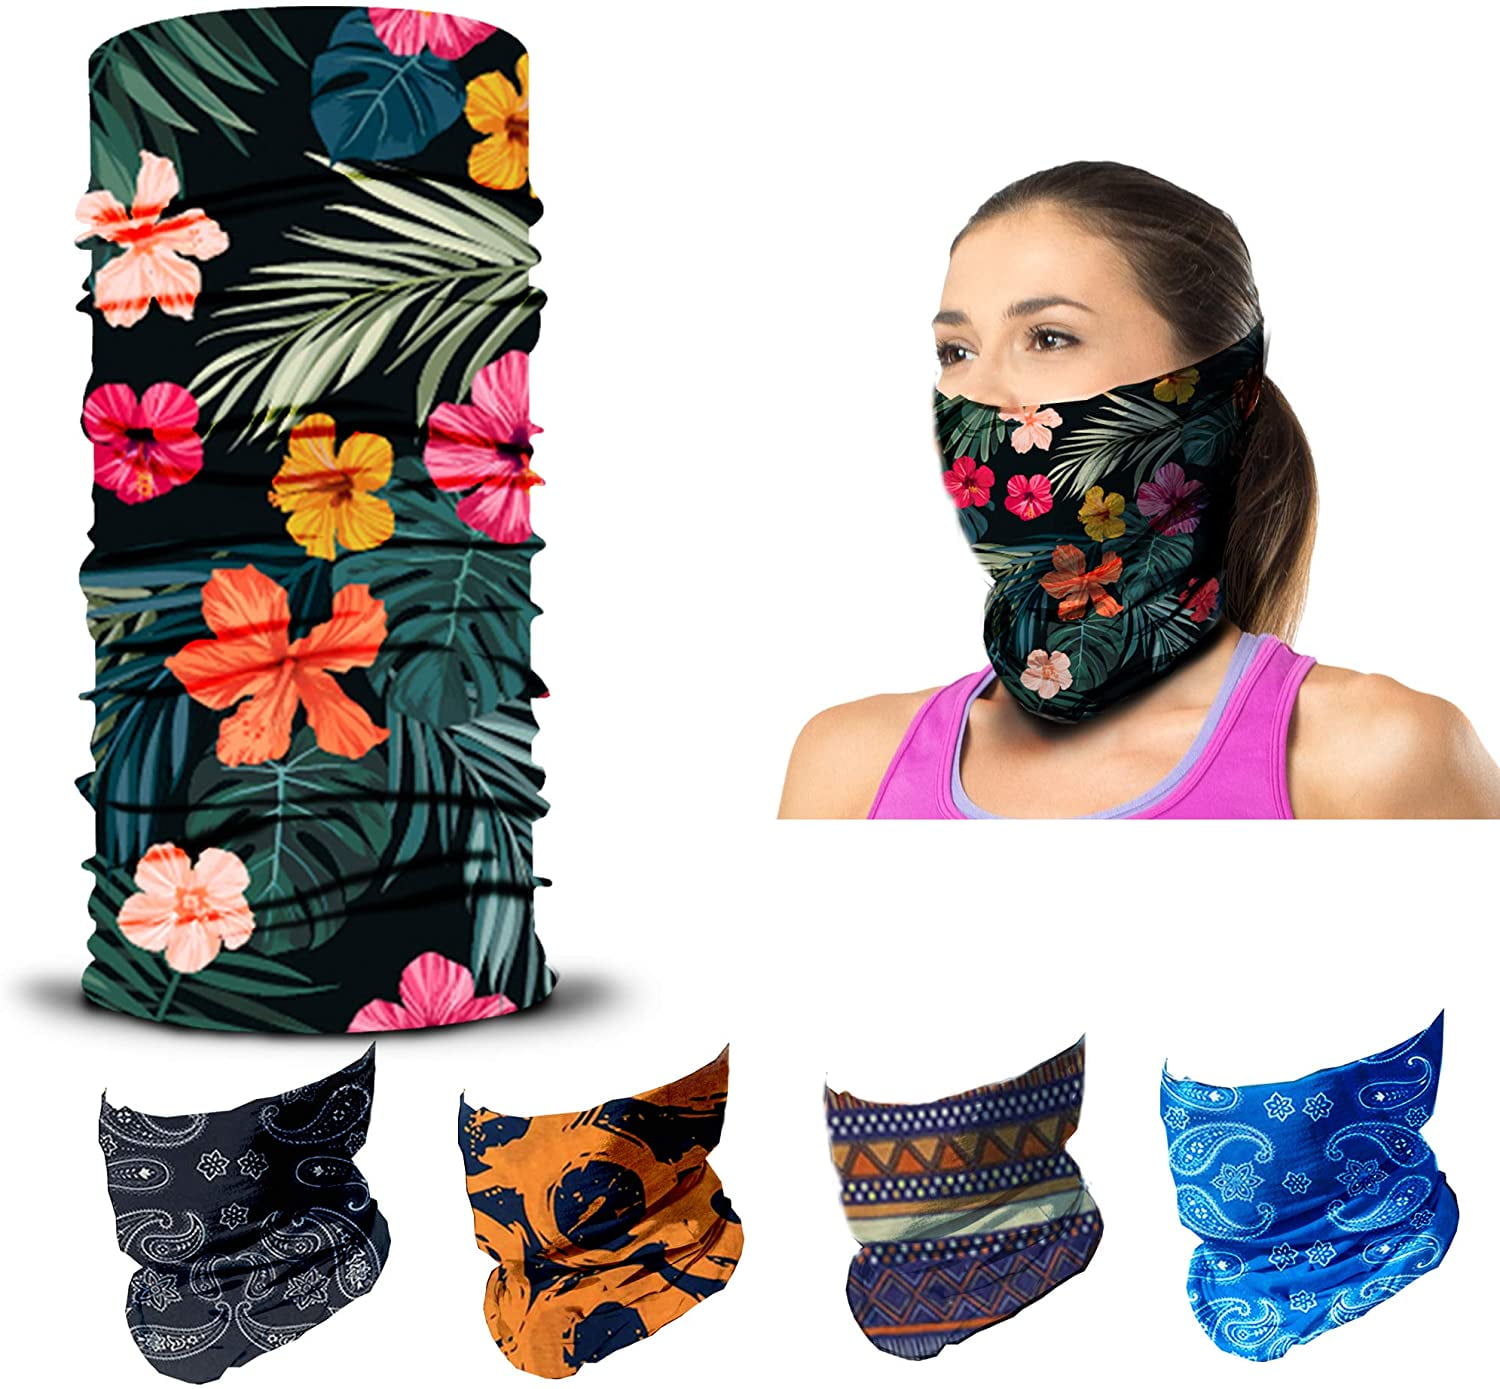 Details about   Unisex Cool Neck Gaiter Face Scarf Cover Headwear Bandana Sun UV Shield+Filter 